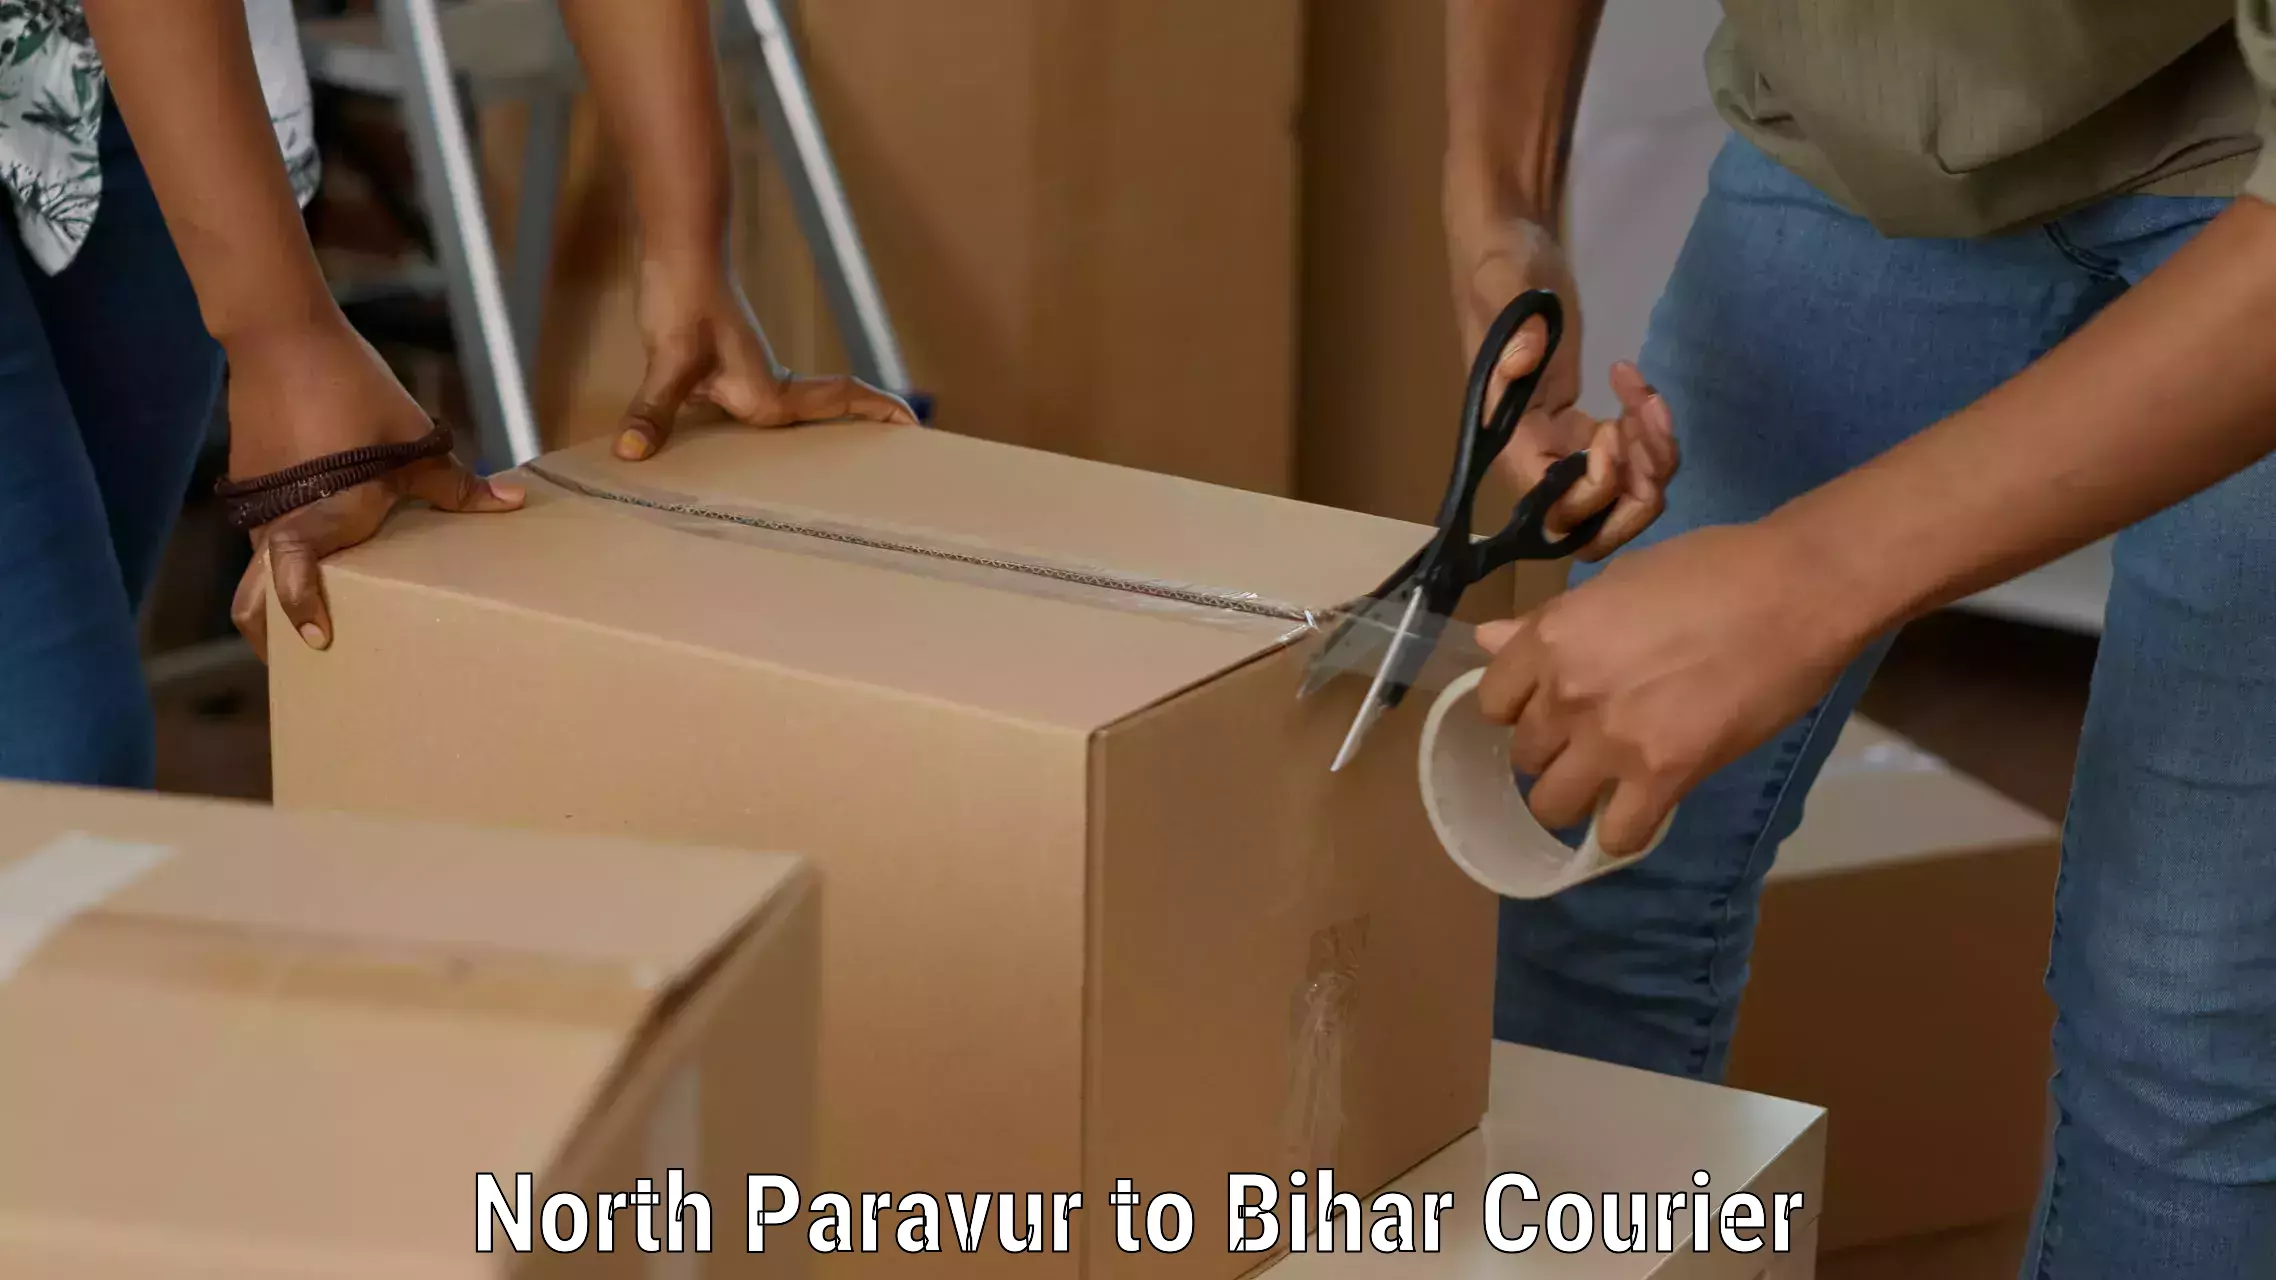 Corporate courier solutions North Paravur to Katihar